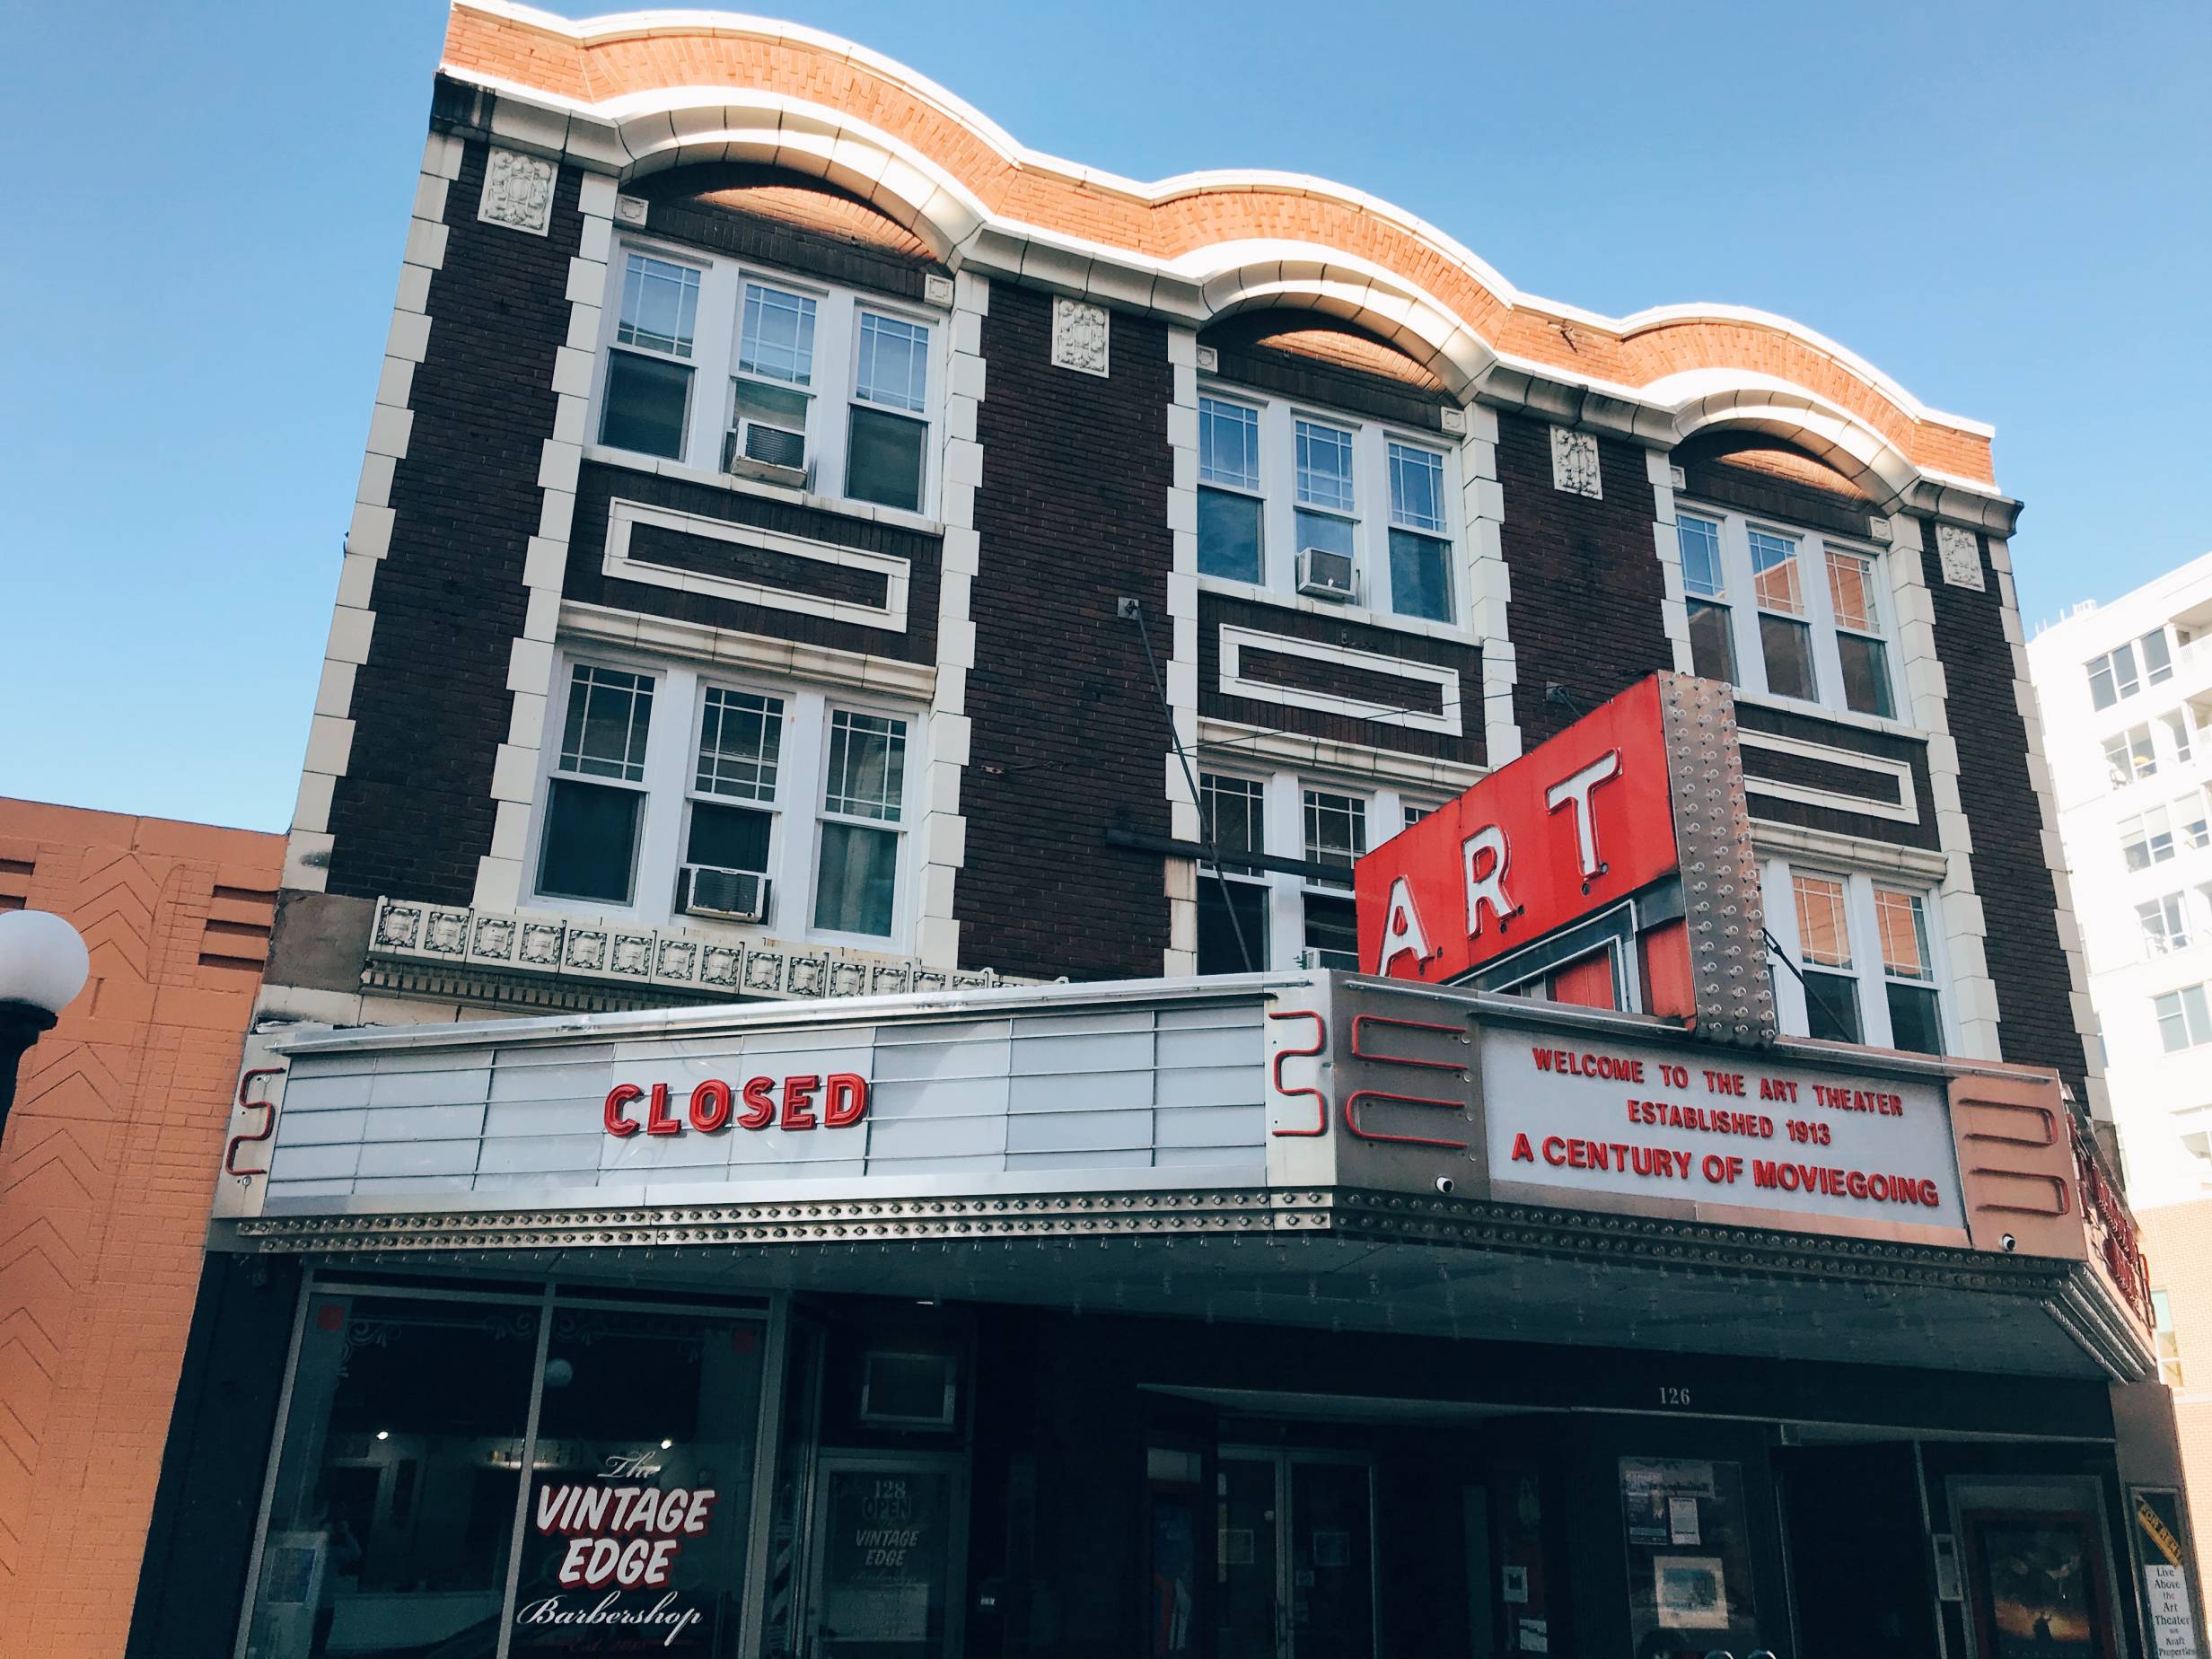 The Art Theater is closing; now what?